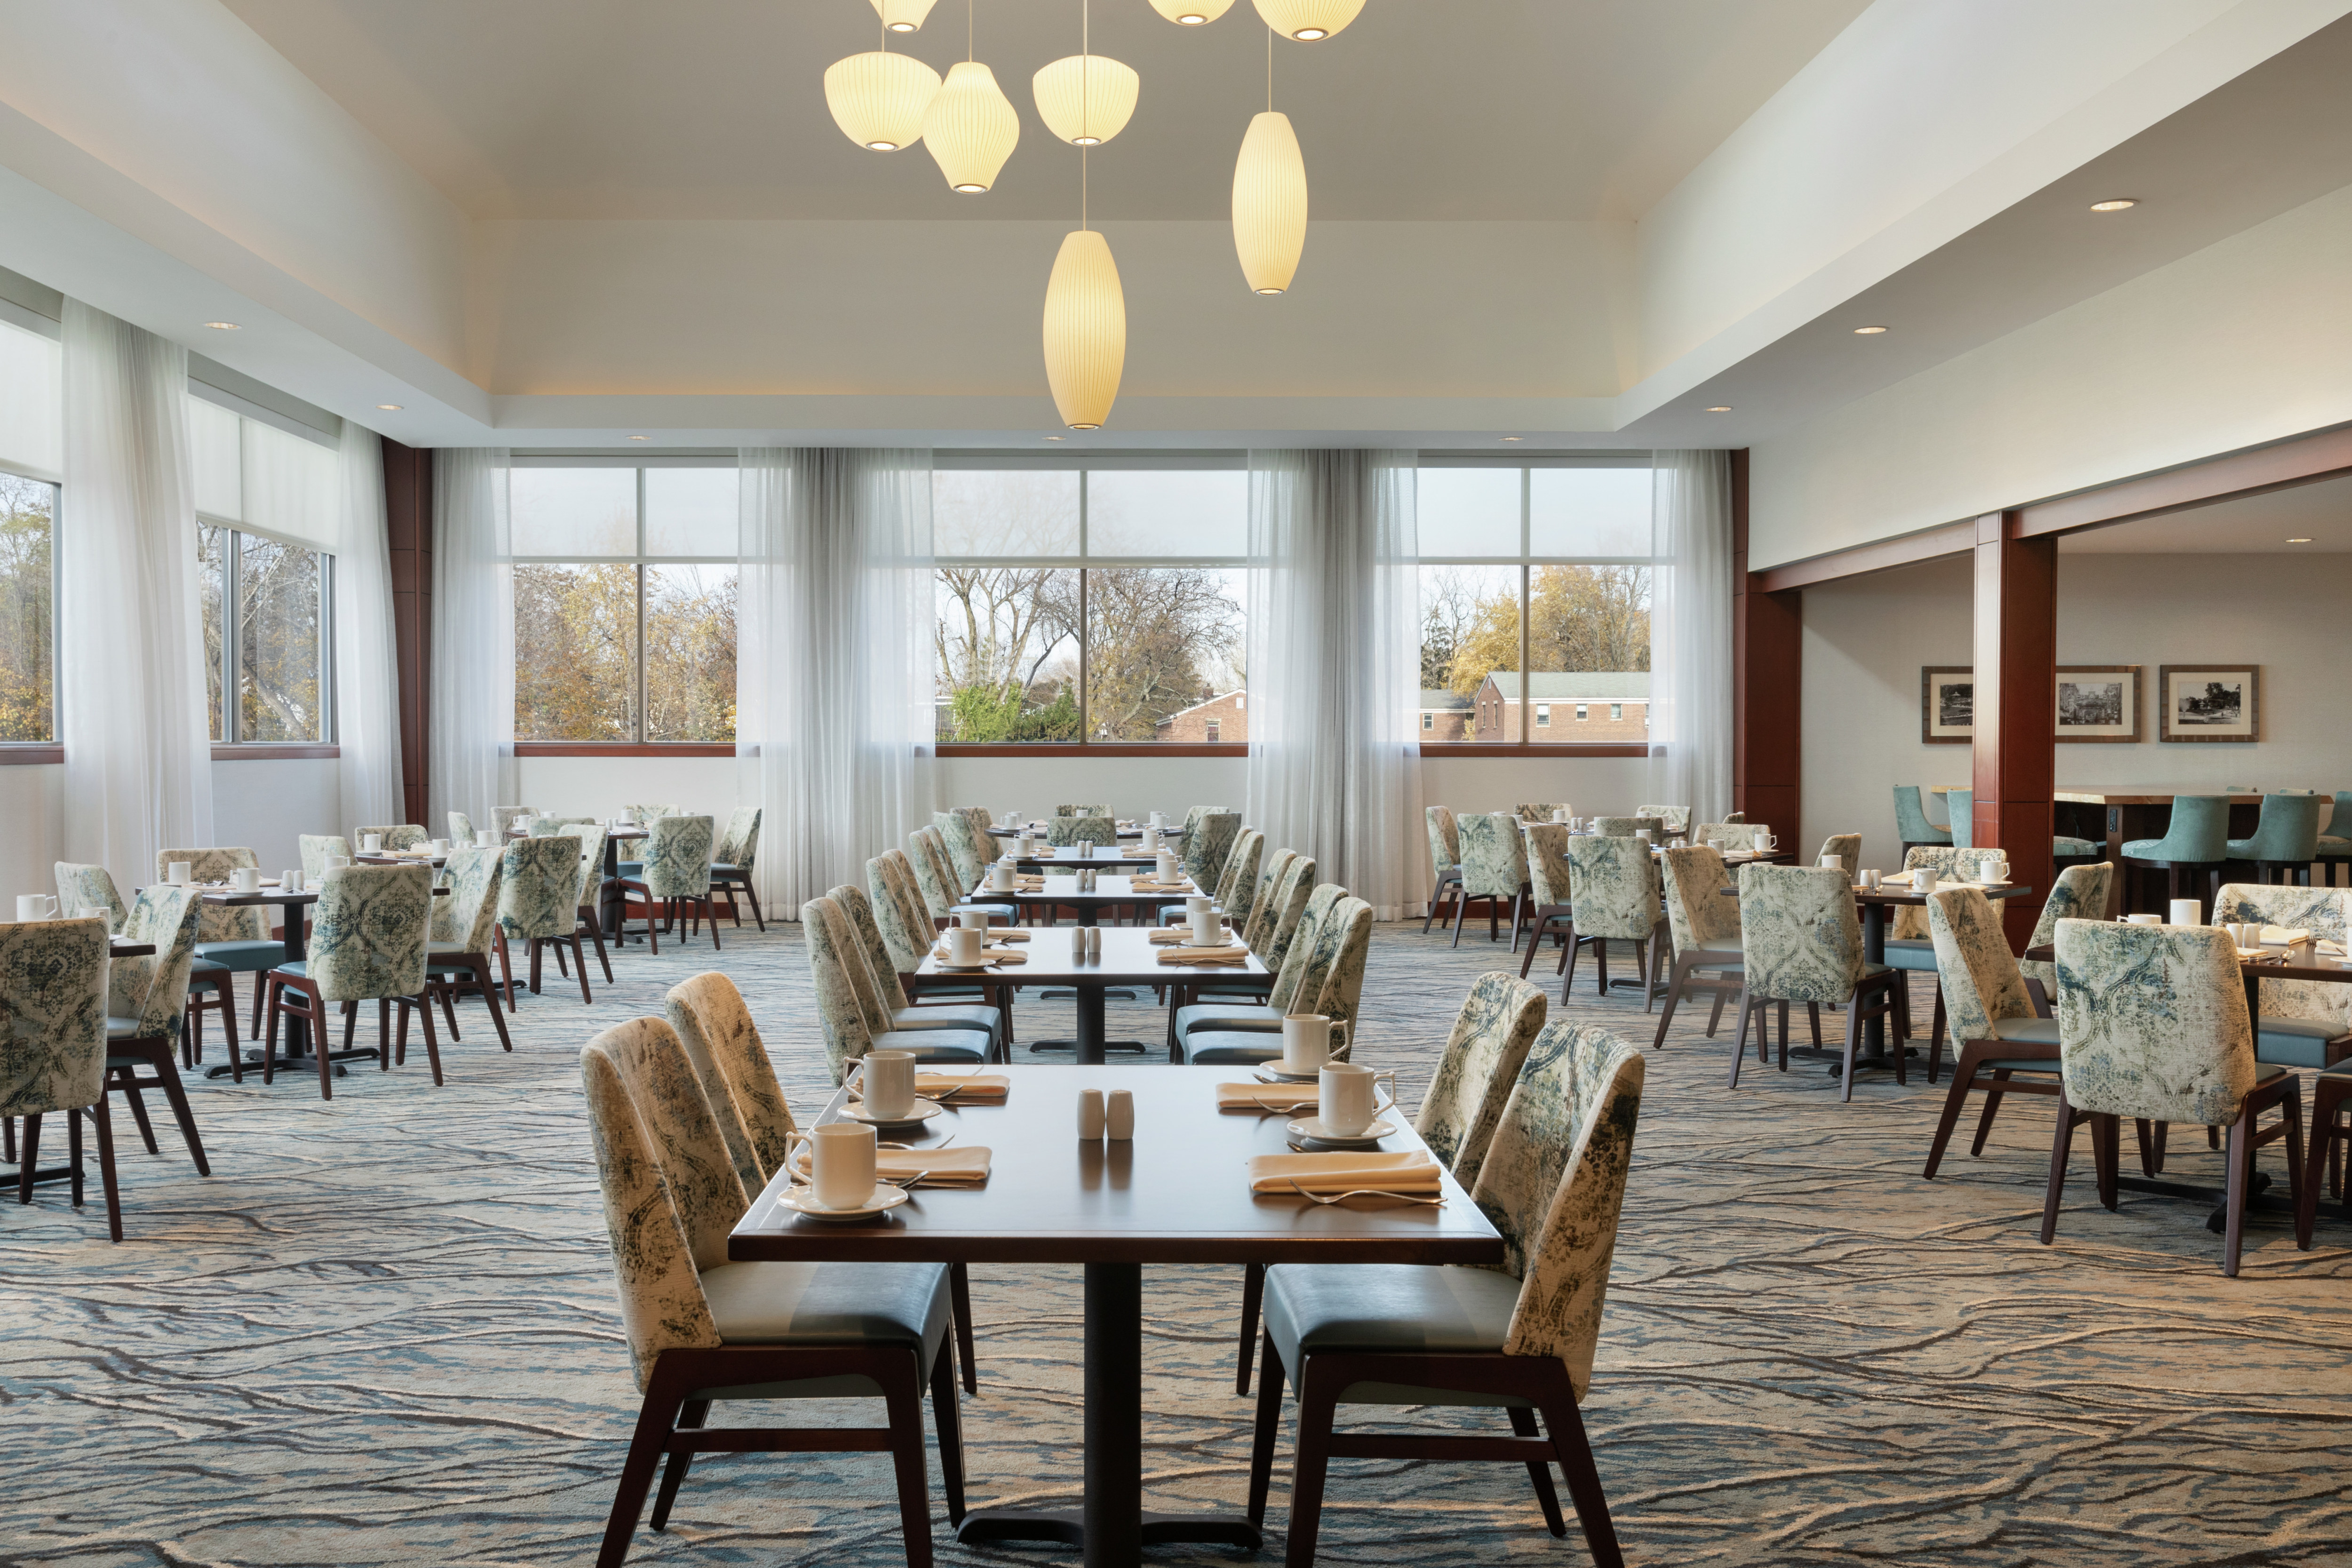 Bright breakfast area featuring ample seating, outside views, and stunning light fixture.